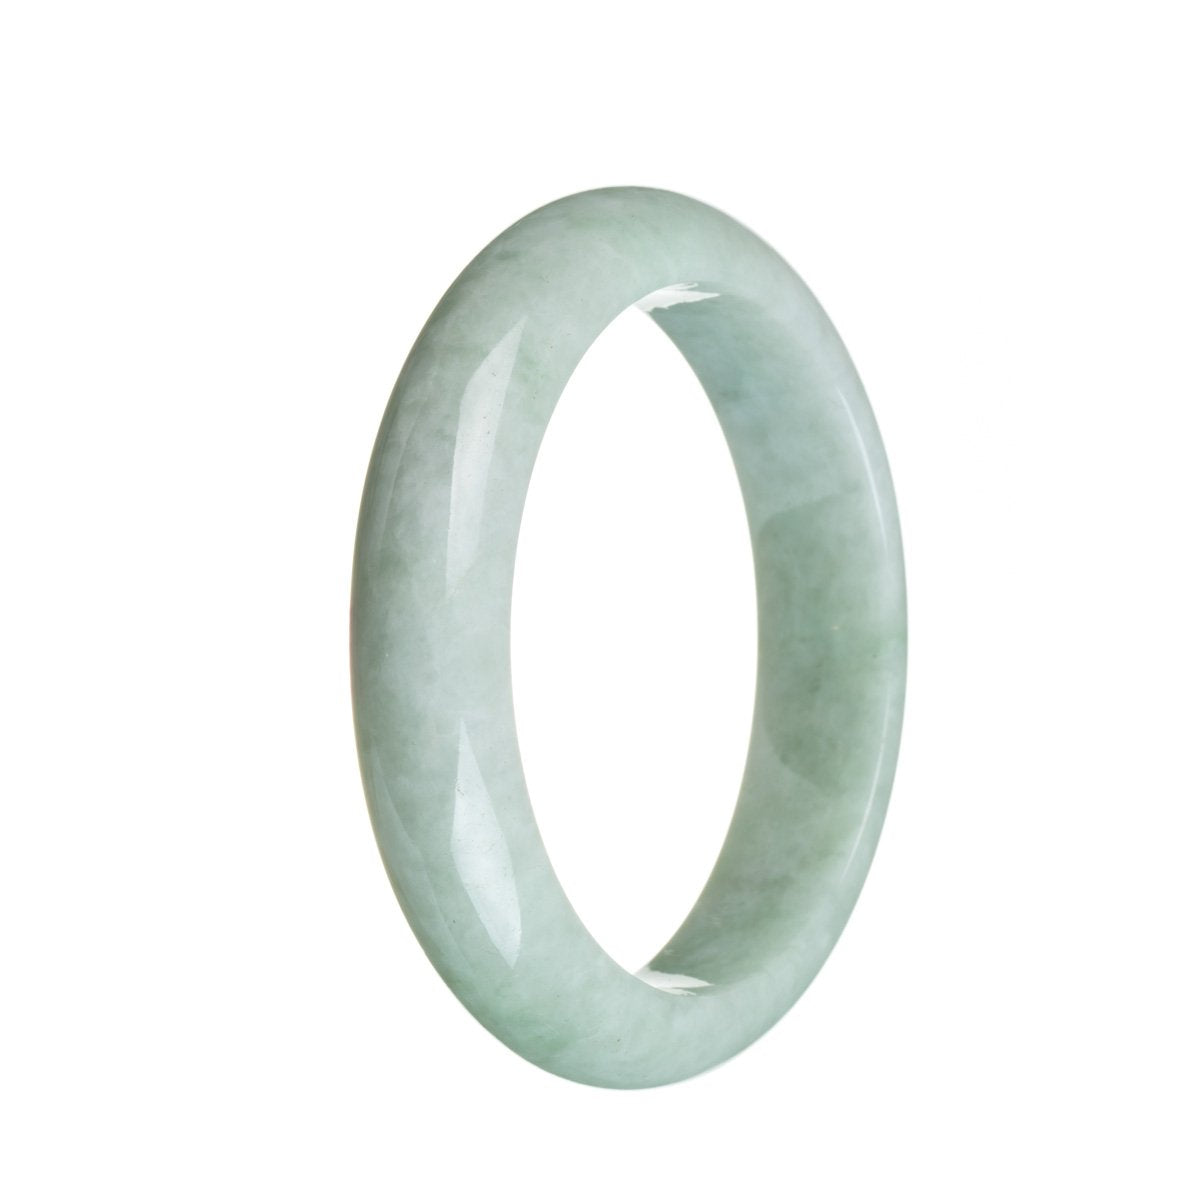 A pale green jadeite bangle with a semi-round shape, measuring 58mm in size.